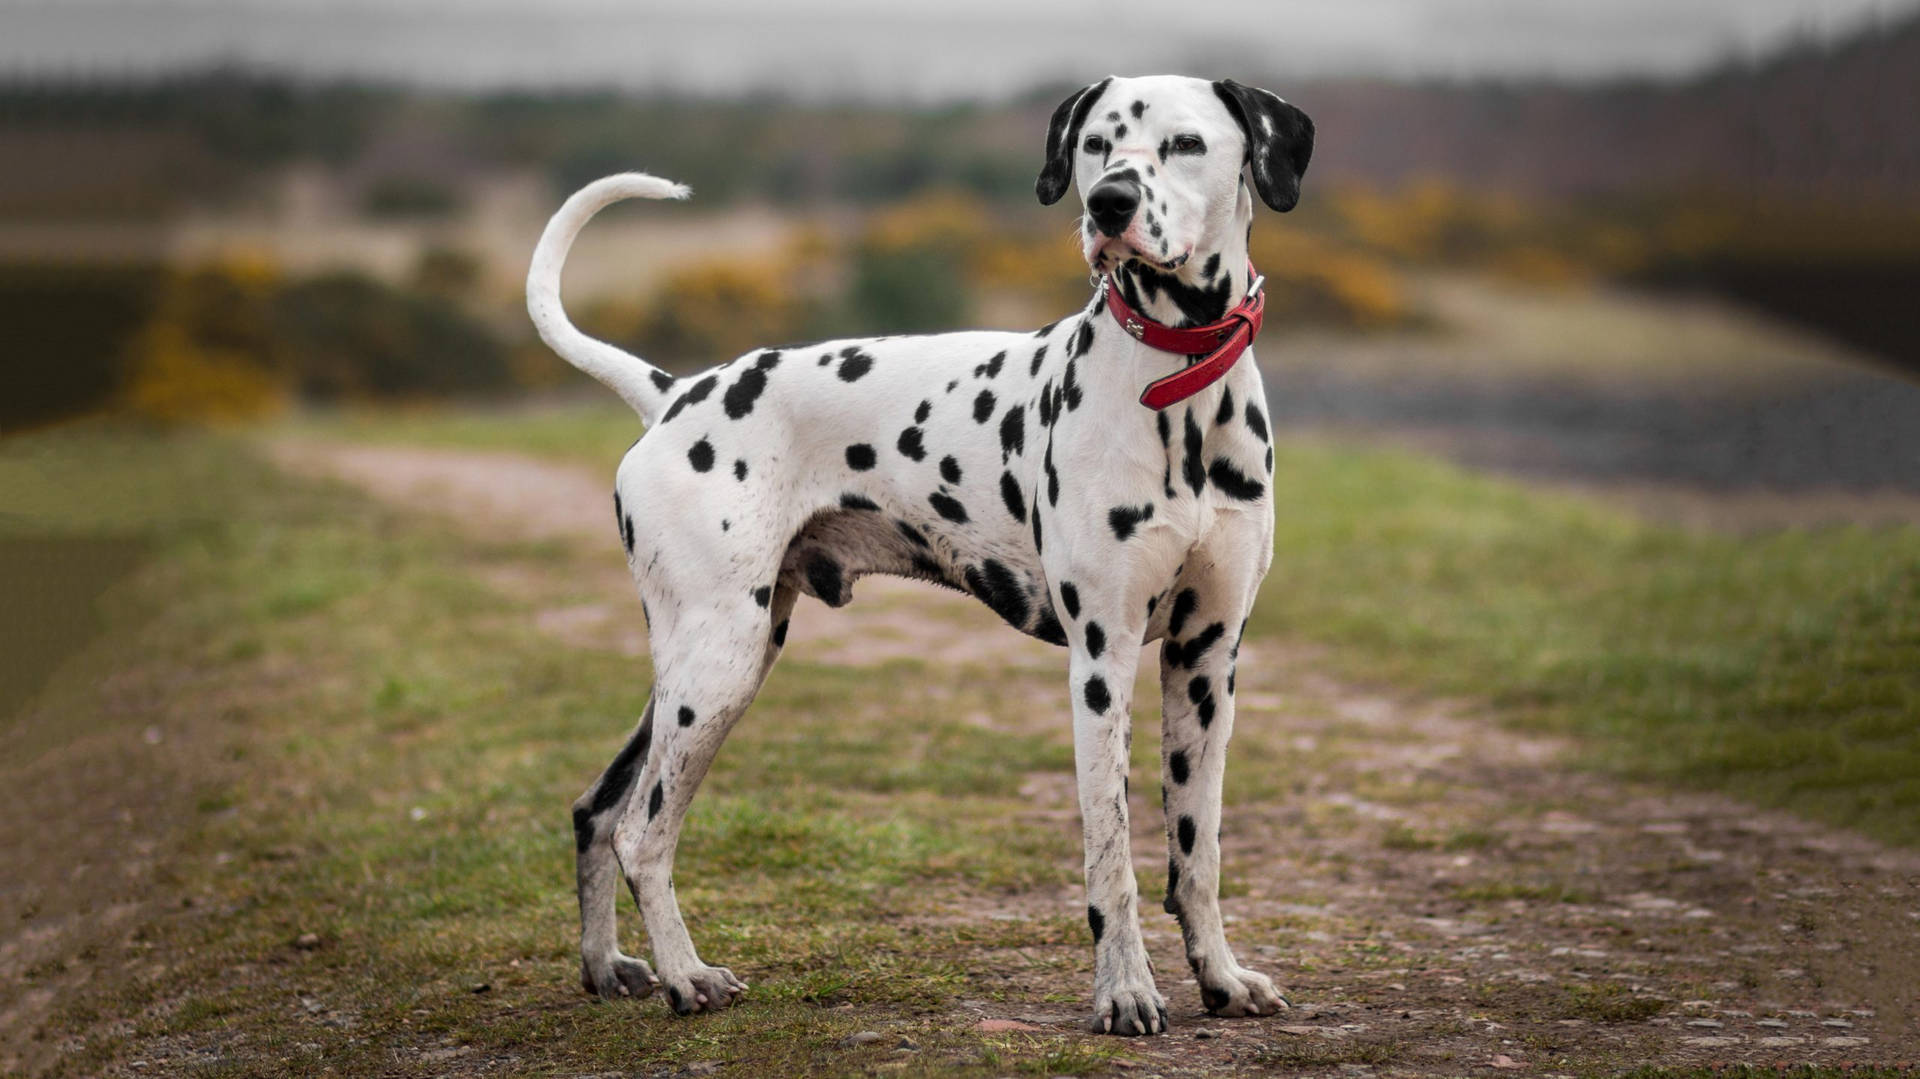 Dalmatian Dog In Red Collar Background